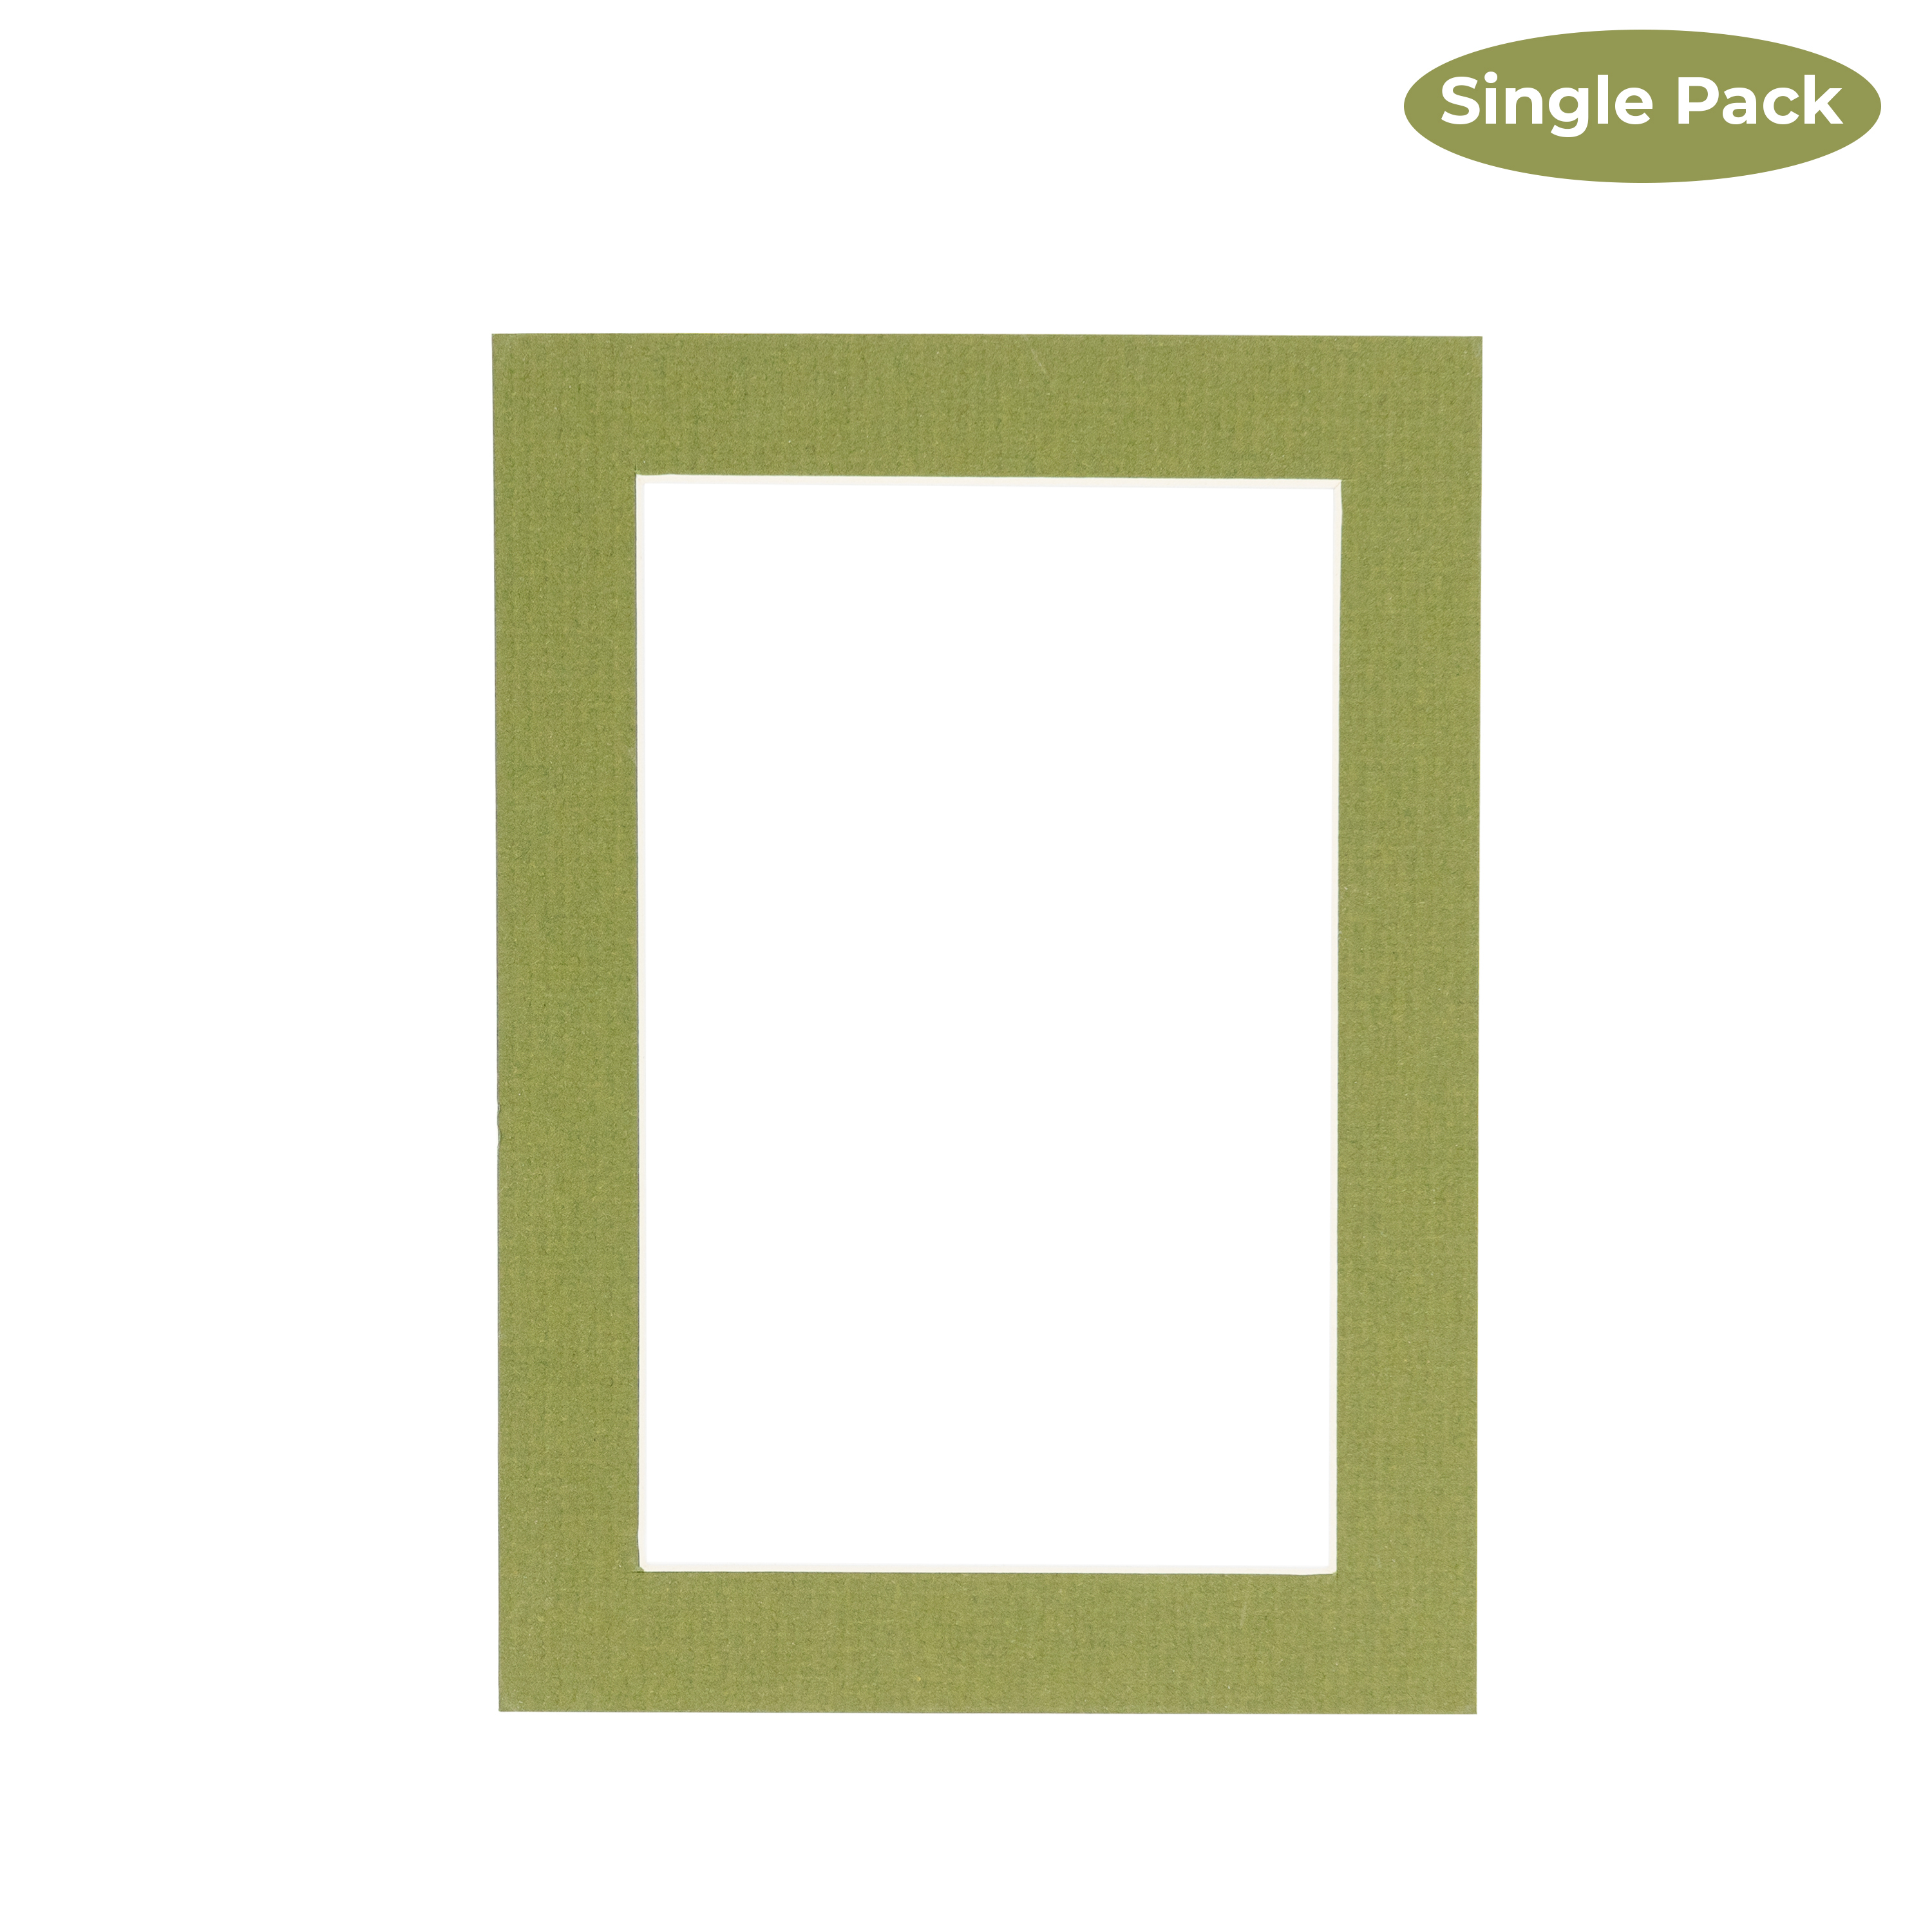 CustomPictureFrames.com Dill Acid Free 10x12 Picture Frame Mats with White Core Bevel Cut for 8x10 Pictures - Fits 10x12 Frame - One Mat